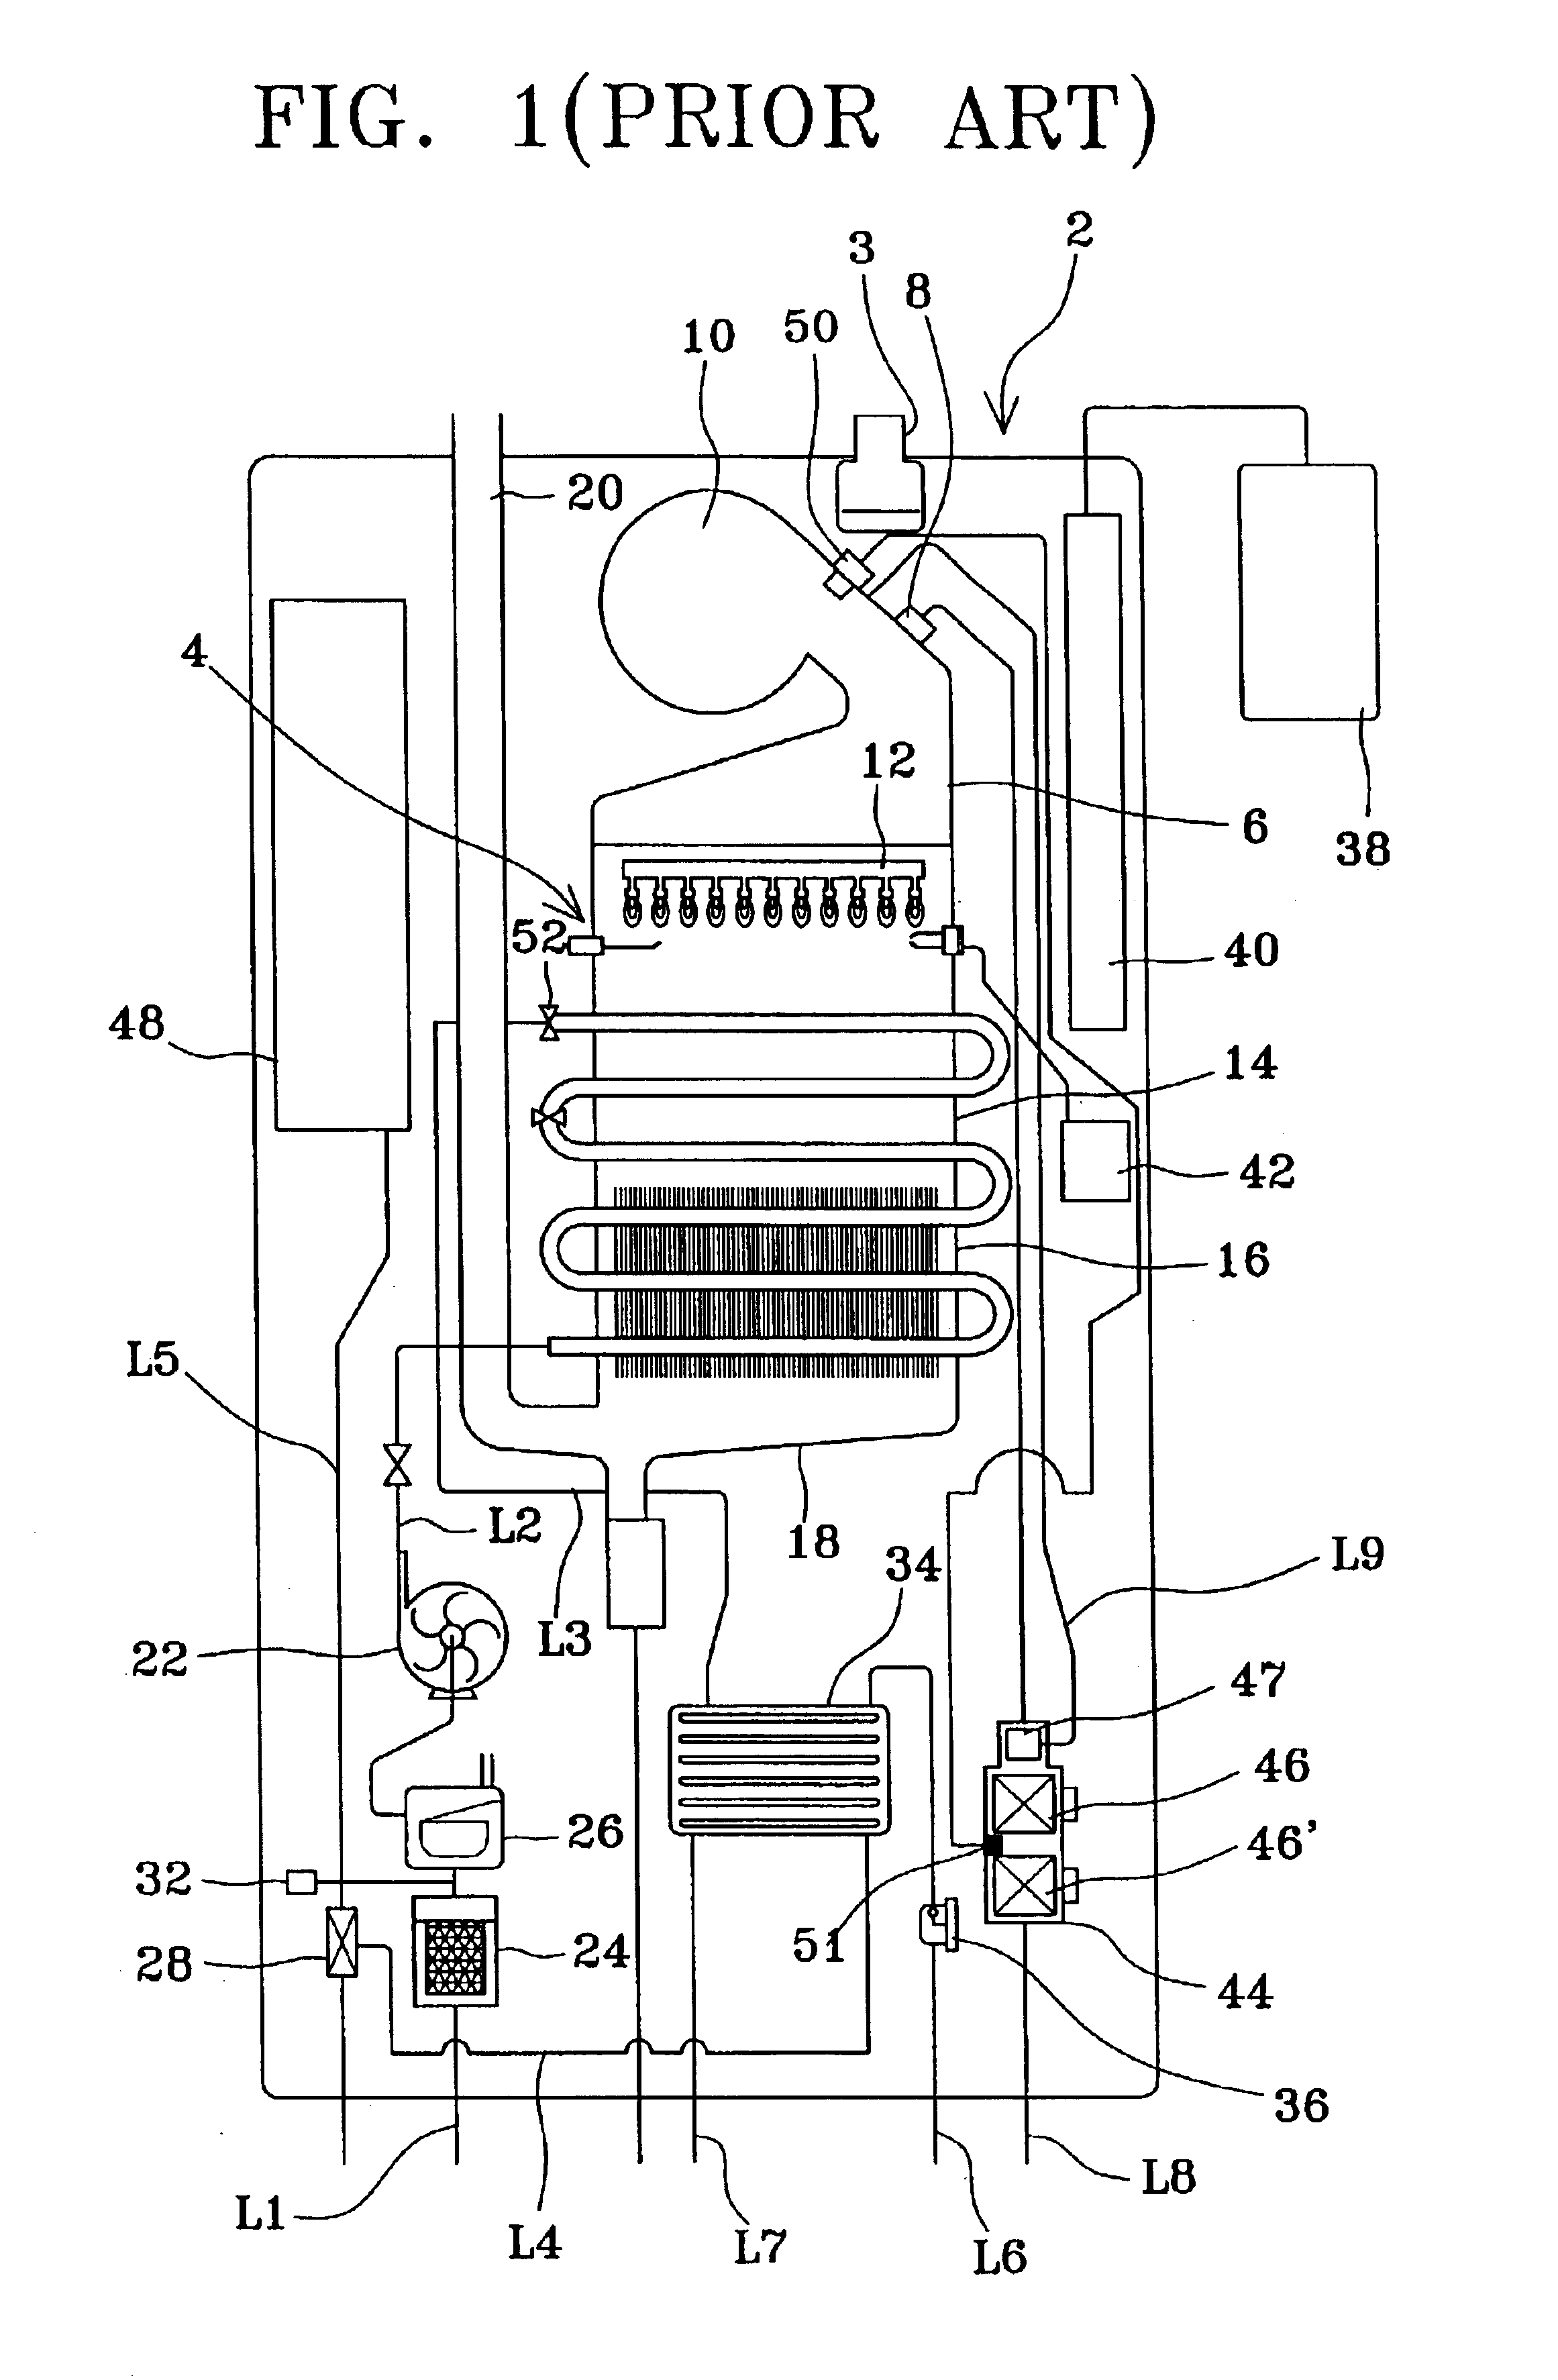 Air-proportionality type boiler